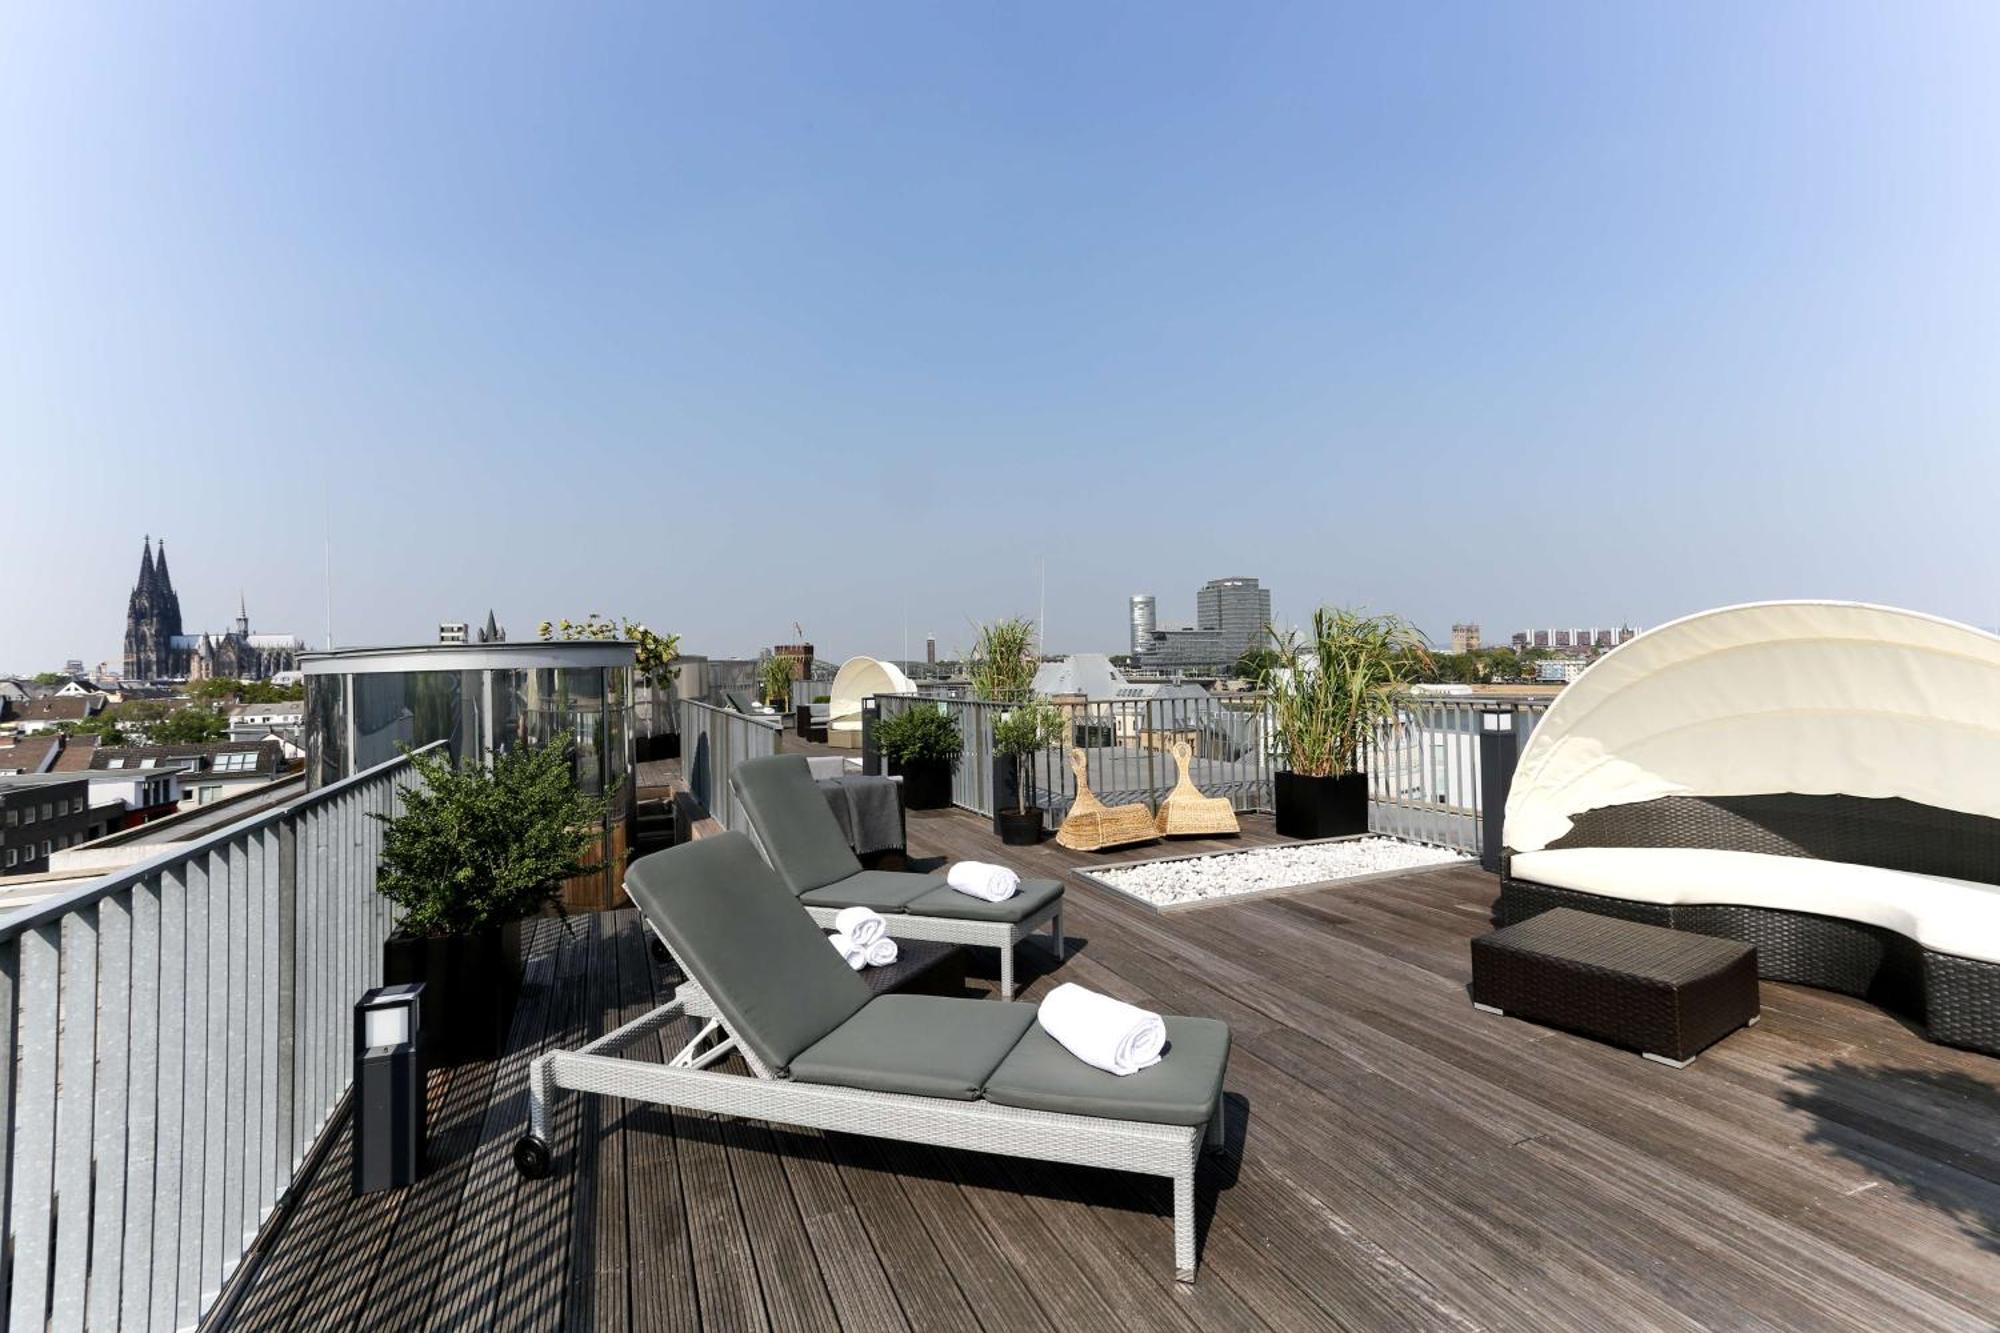 Art'Otel Cologne, Powered By Radisson Hotels 외부 사진